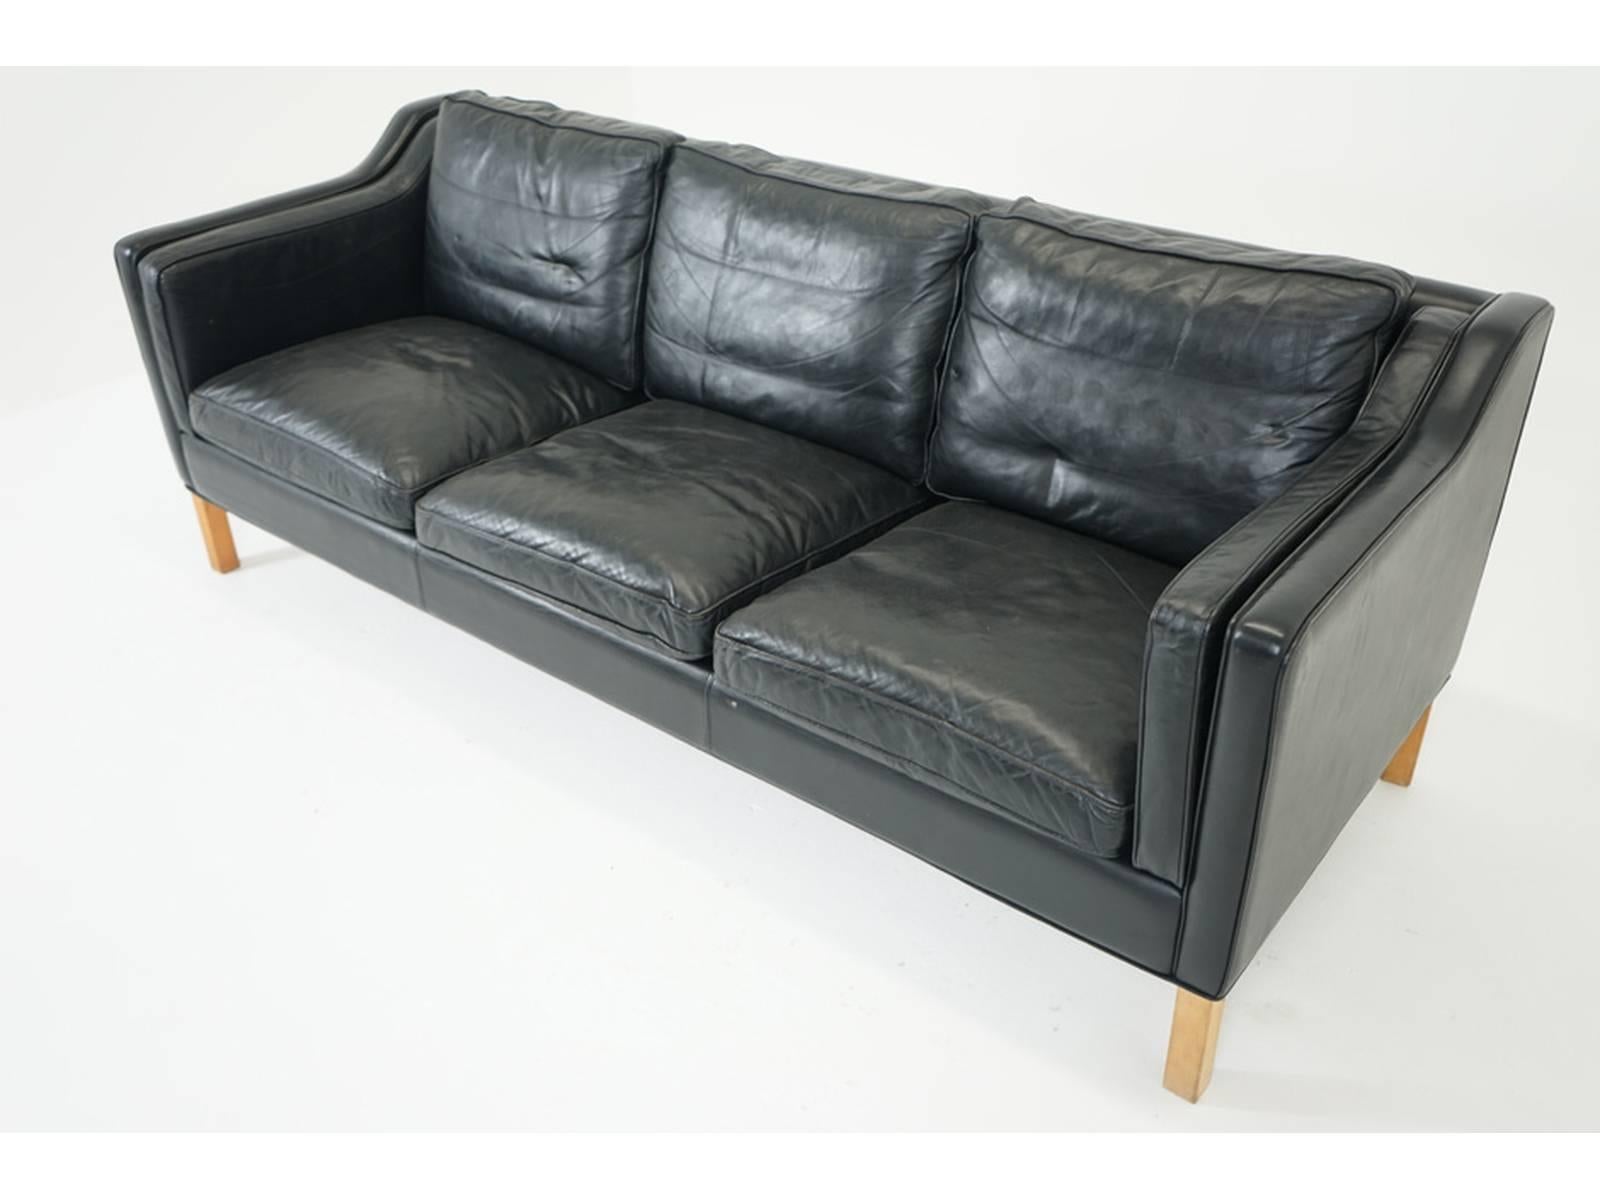 A stylish Mid-Century Modern sofa from Denmark. Original black leather in very good vintage condition, no rips or tears. Wooden frame is solid. Overall surfaces minor, normal wear consistent with age and light use, please see photos.